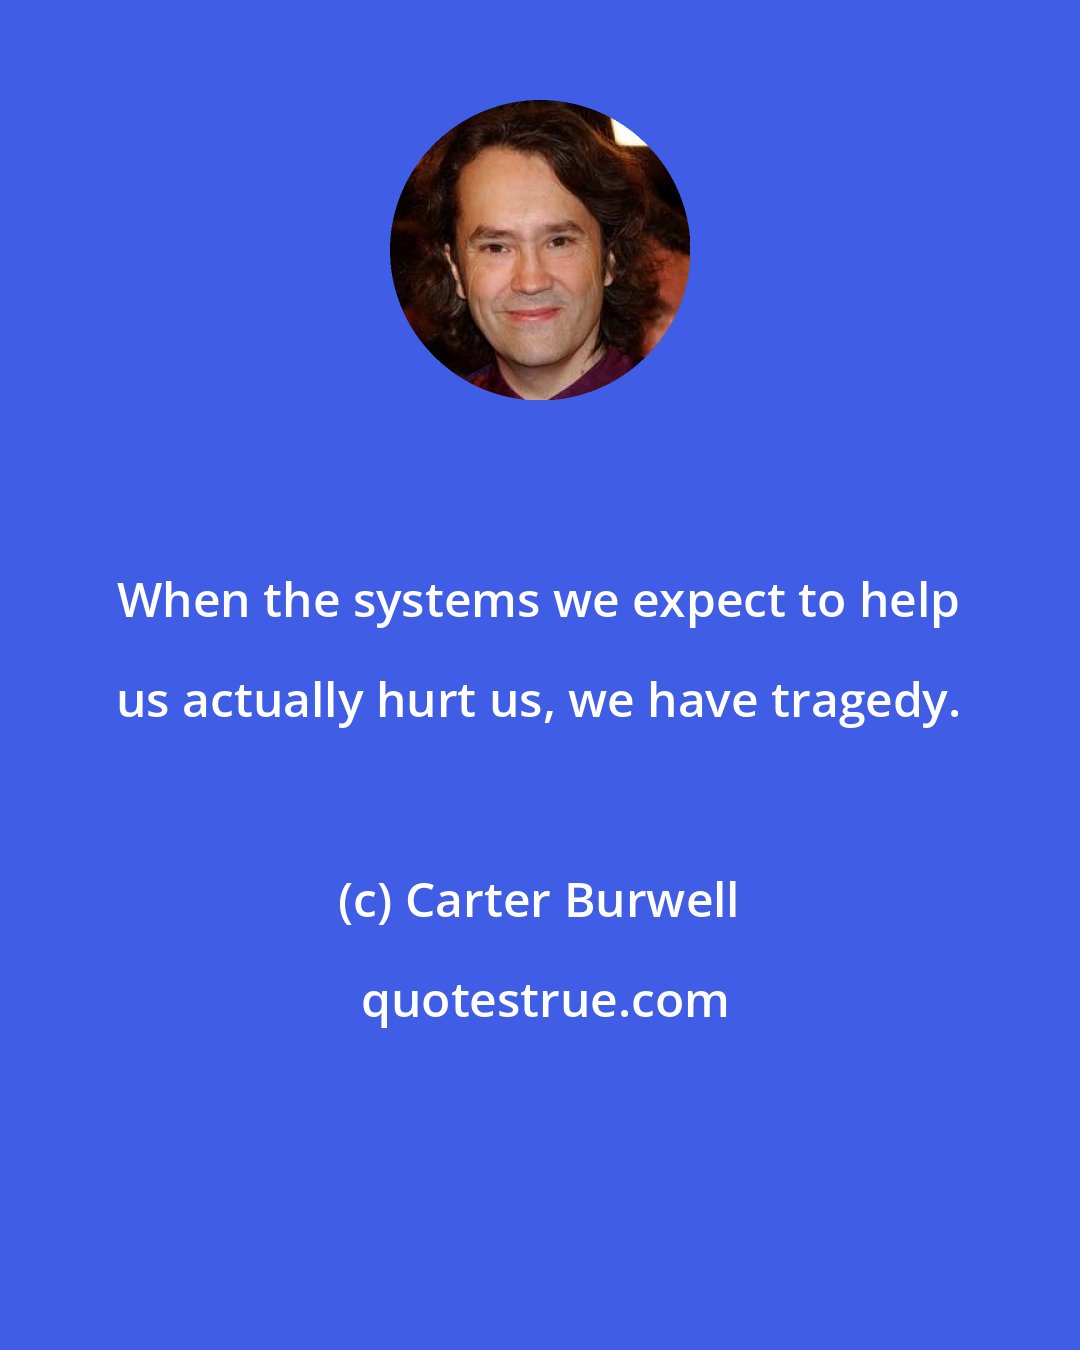 Carter Burwell: When the systems we expect to help us actually hurt us, we have tragedy.